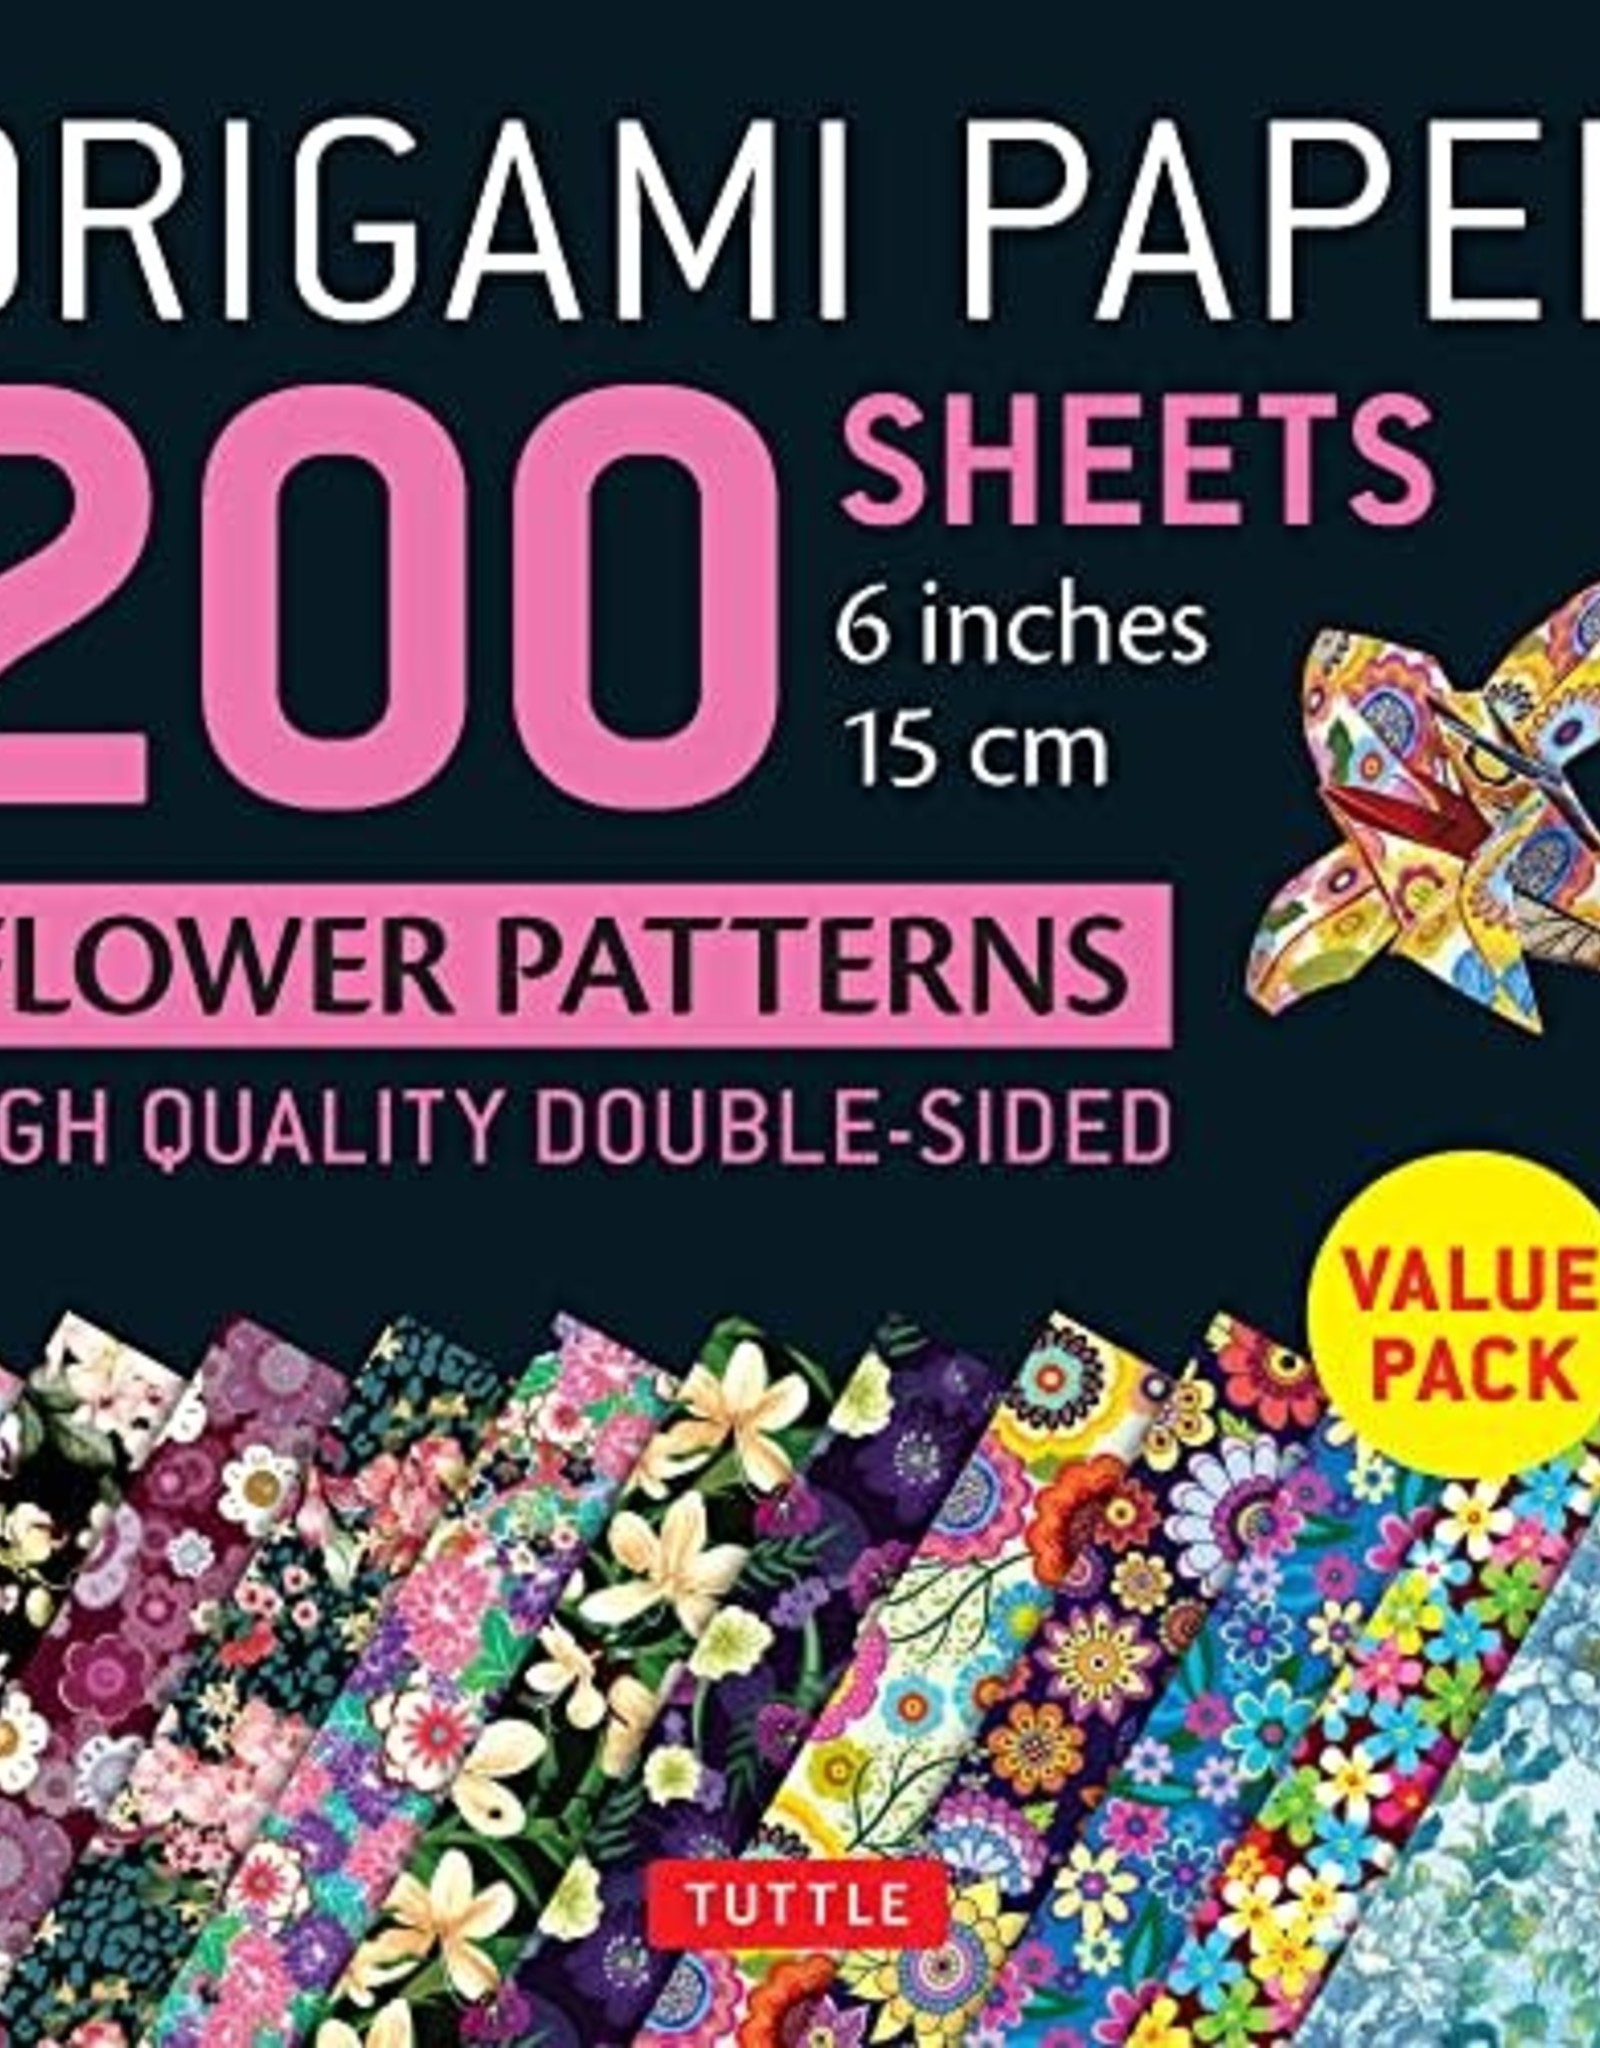 Origami Paper Flower Patterns 200 Sheets